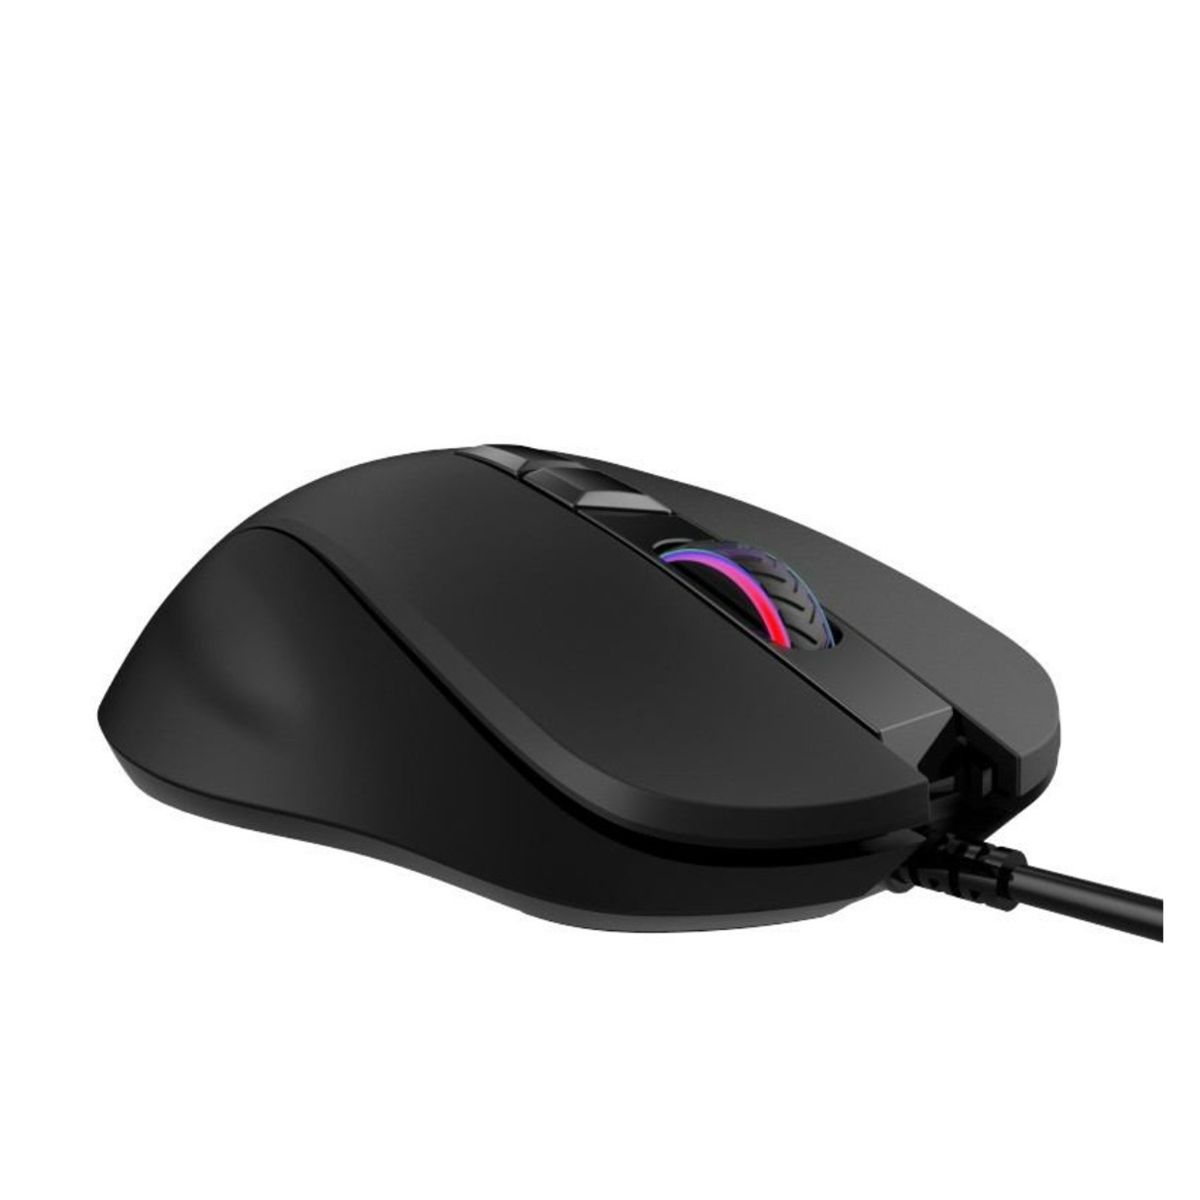 GAMEDIAS-M18-Wired-Optical-USB-Gaming-Mouse-4200DPI-RGB-Backlit-6-Buttons-Mouse-1662789